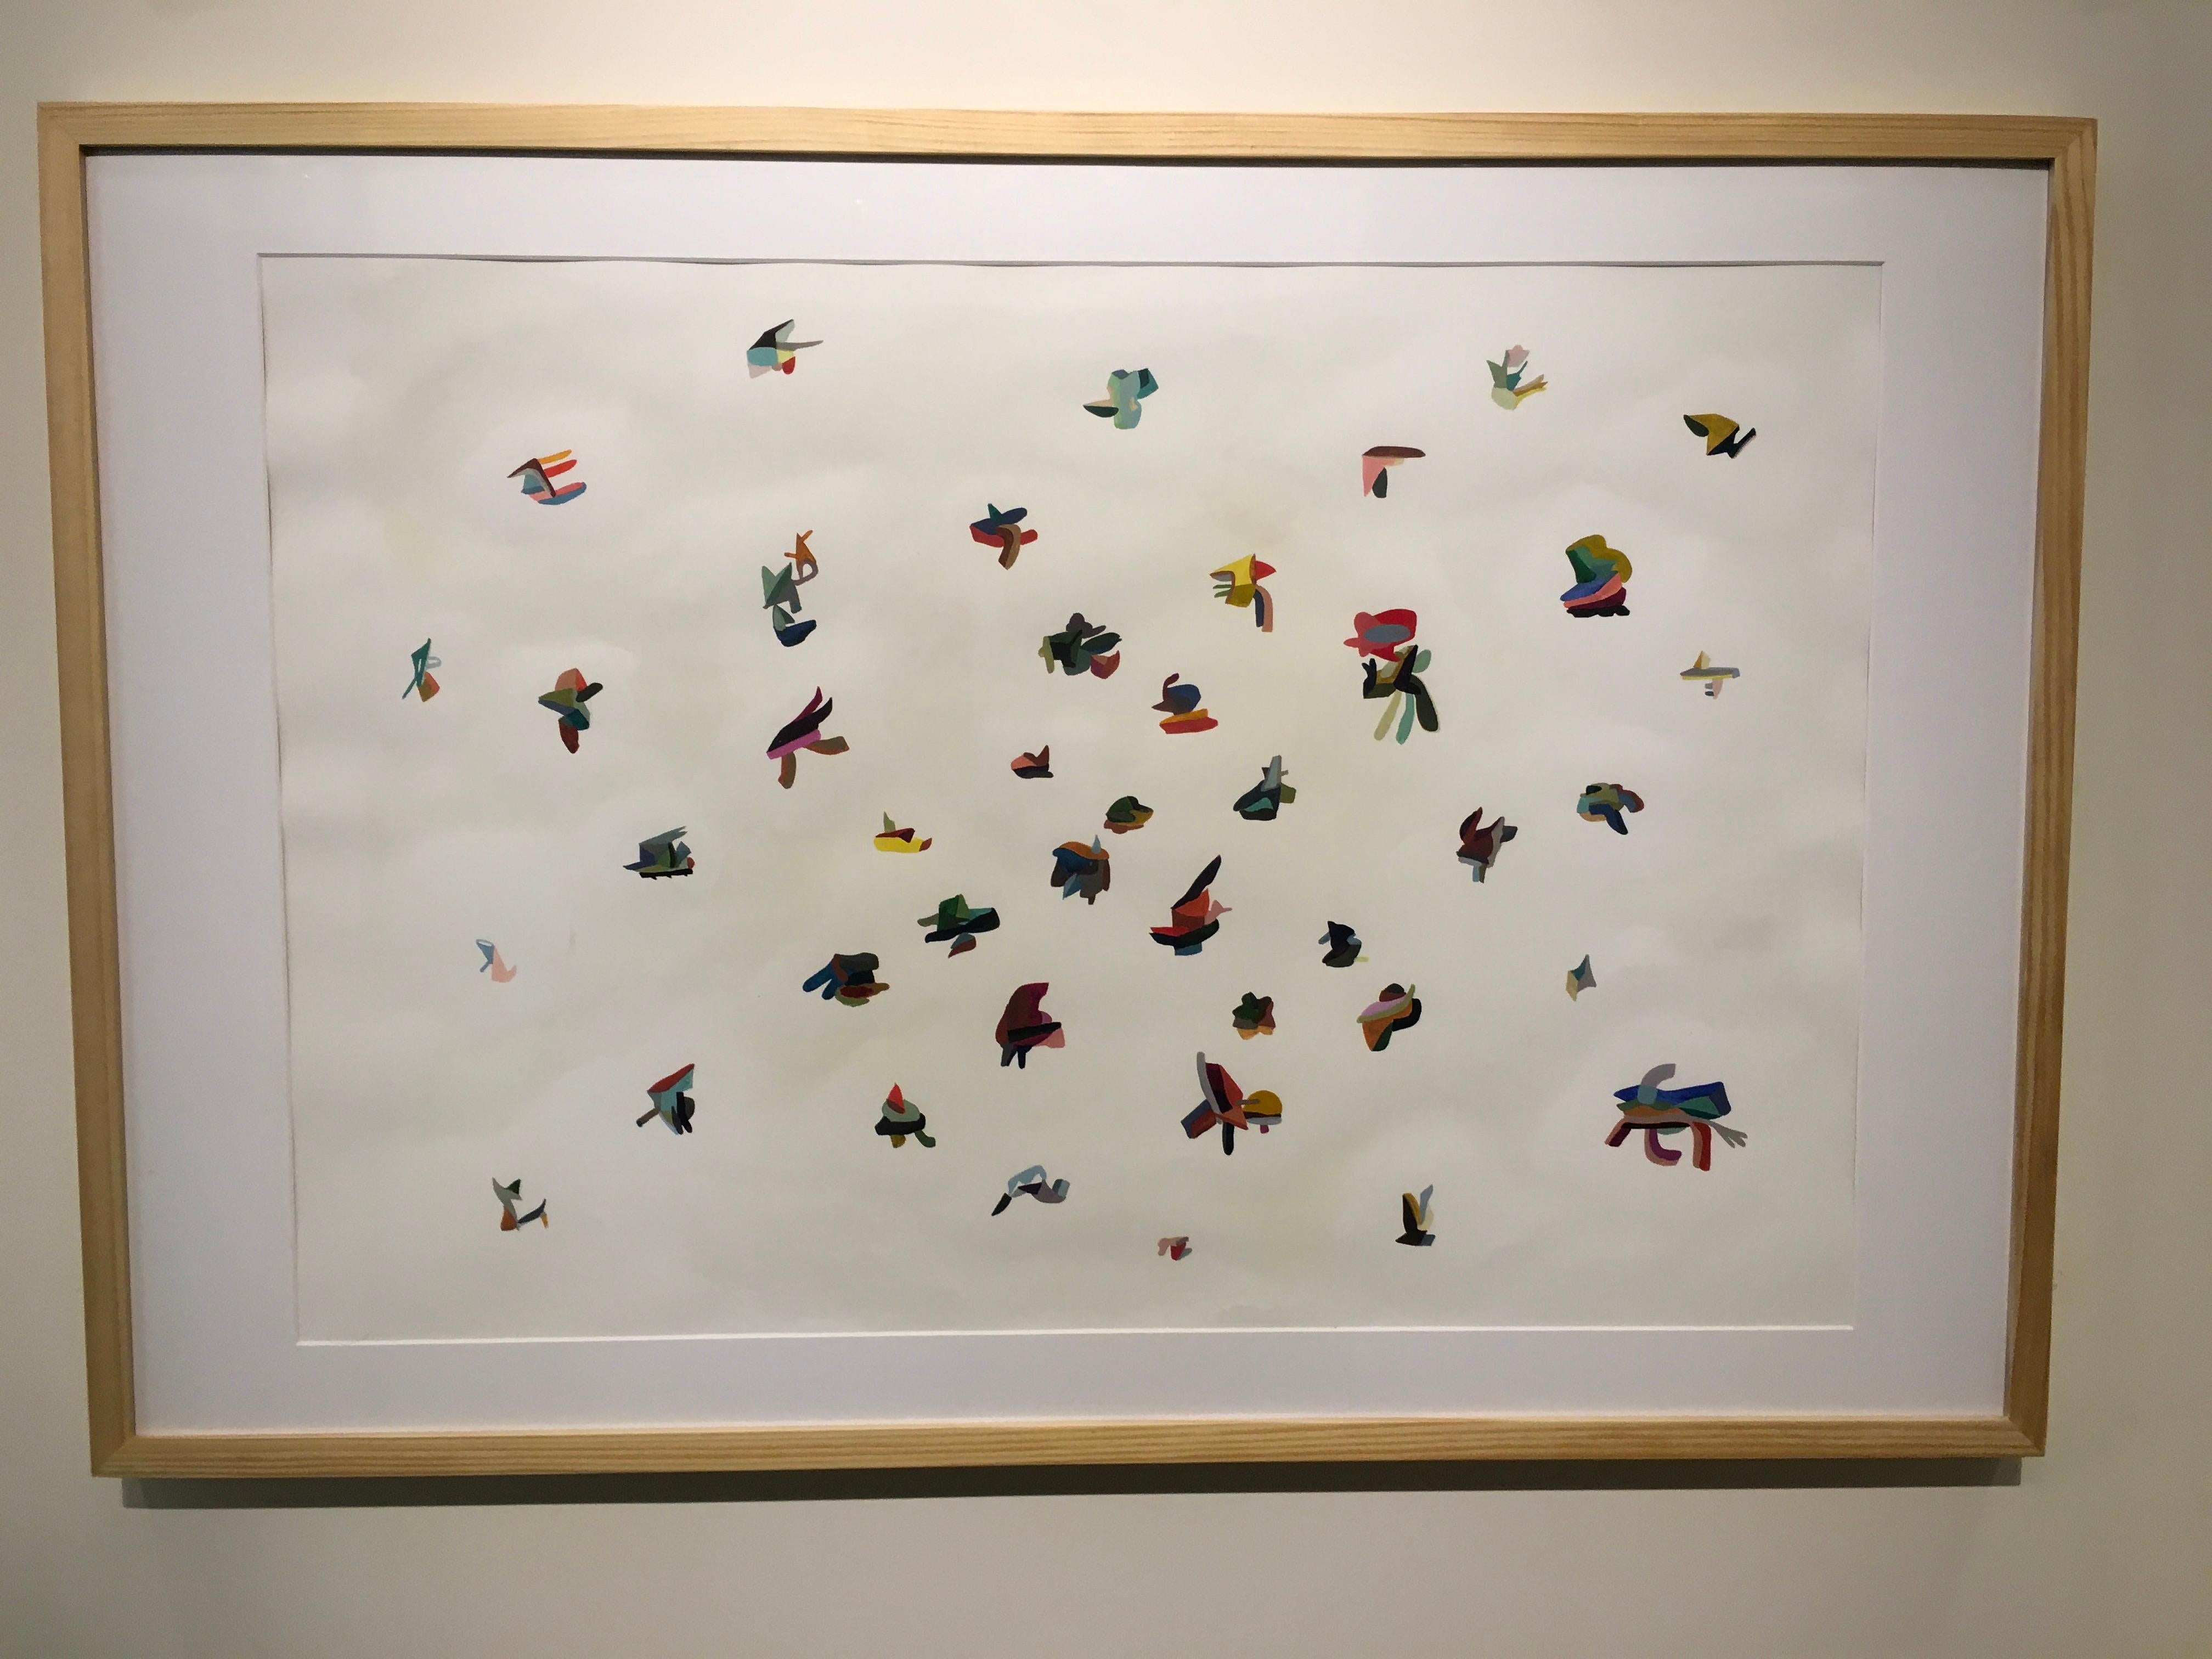 This framed 27" x 37" watercolor painting by Irish artist, Peter Healy is from the 'In Flux' Pandemic Collection. The painting comes vibrantly alive as the small painted shapes and forms almost vibrate with the desire to dance on the white paper. No